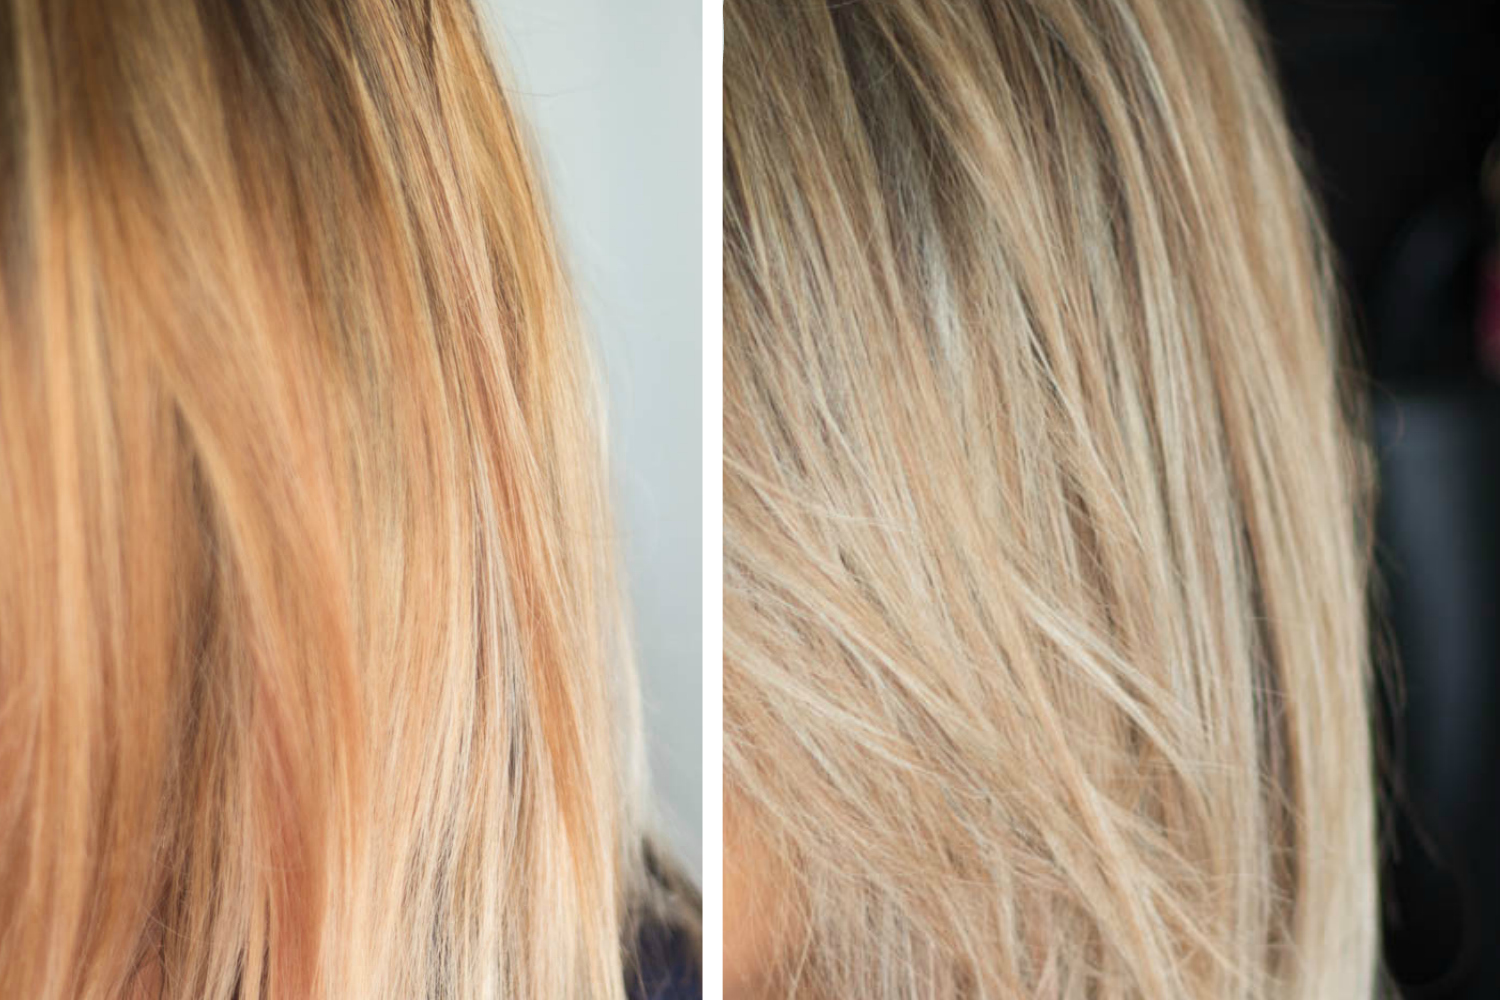 7. Can You Use Blue Toner on Dark Brassy Hair? - wide 5